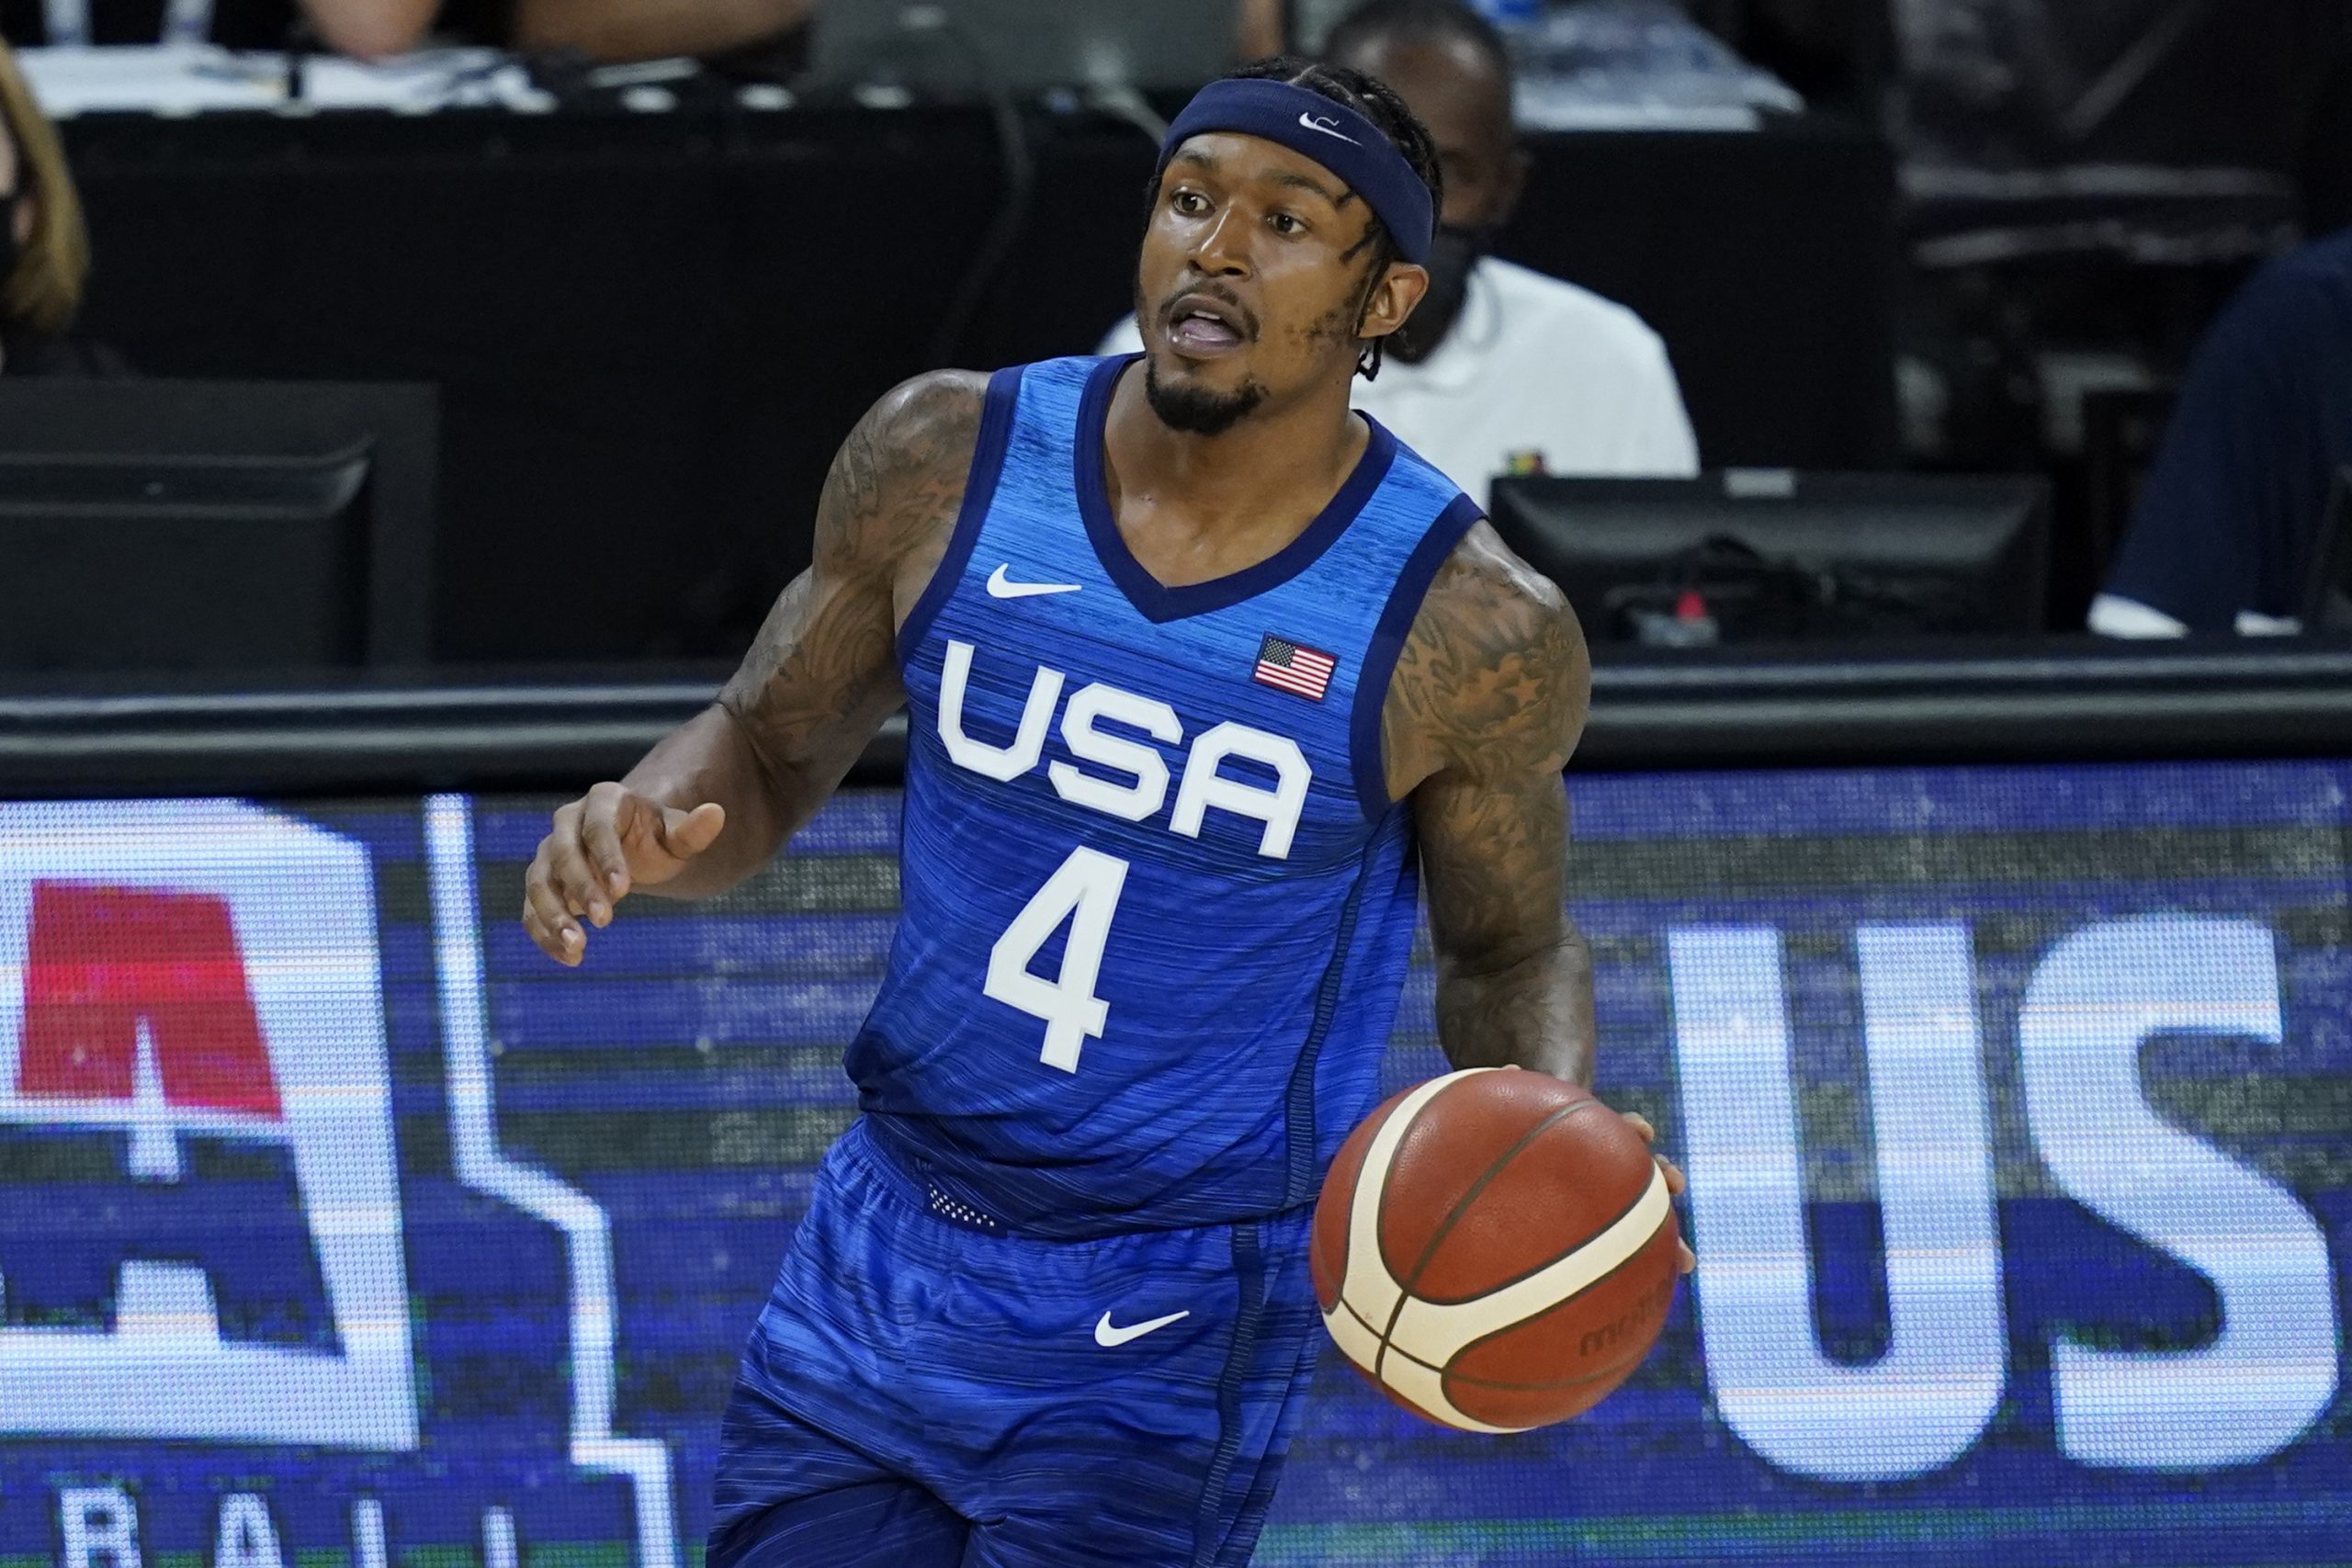 United States' Bradley Beal plays against Australia during an exhibition basketball game Monday, July 12, 2021, in Las Vegas. (AP Photo/John Locher)